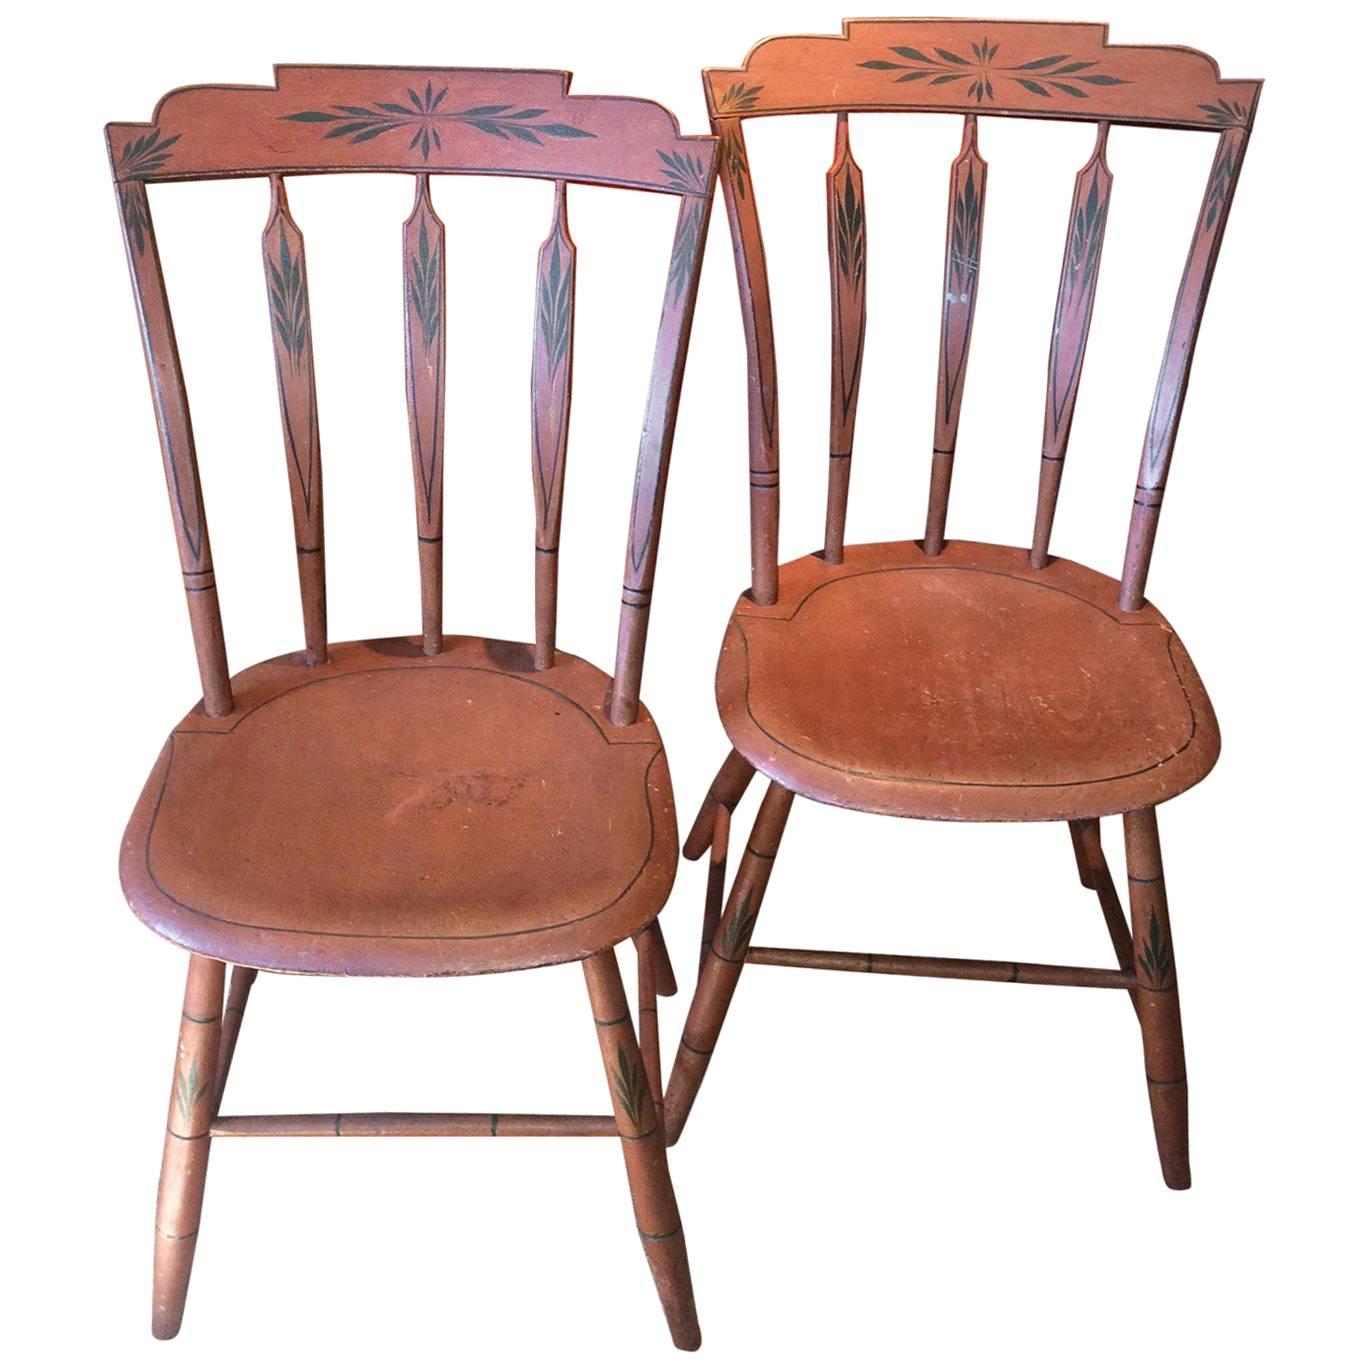 Pair of Salmon-Painted Step-Down Windsor Side Chairs